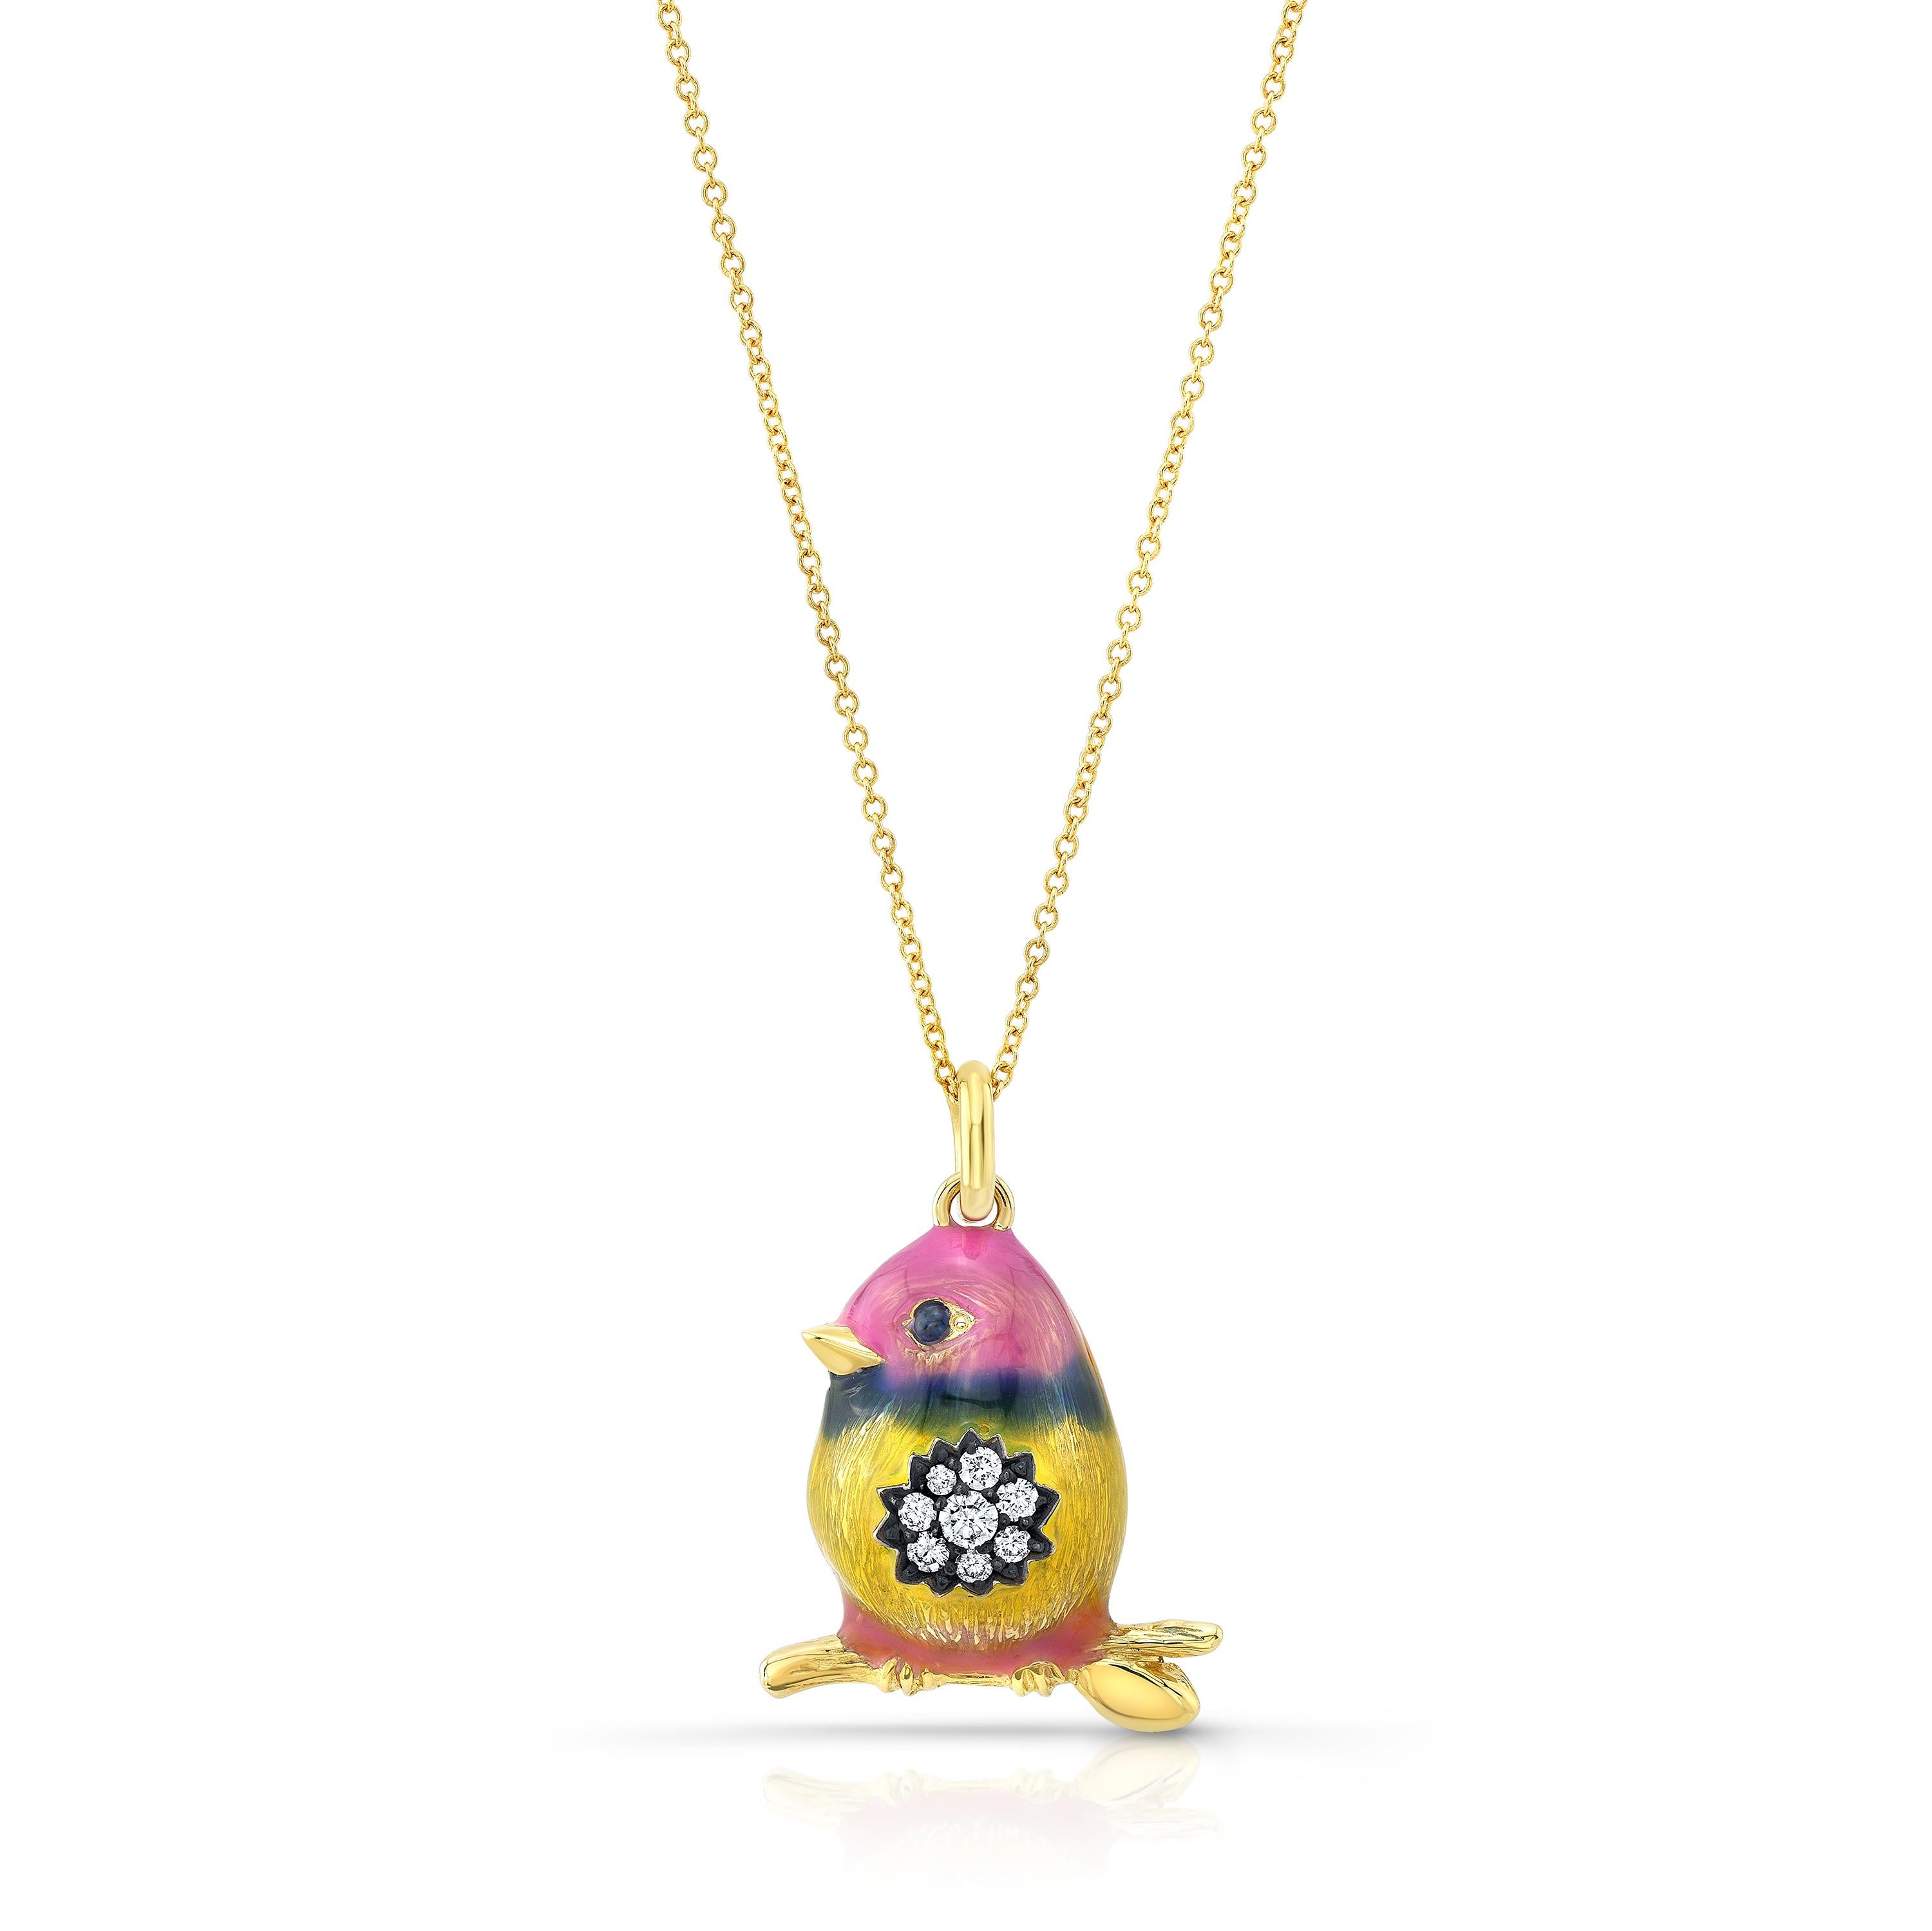 Amy Y’s diamond, sapphire, and painted enamel Rainbow Baby Bird 'Tweety' is a one-of-a-kind treasure.  Handmade by Amy’s European artisans in 18K-yellow gold, painted enamel in colors of the rainbow, and a burst of diamond inlay of 0.25ct. full cut,